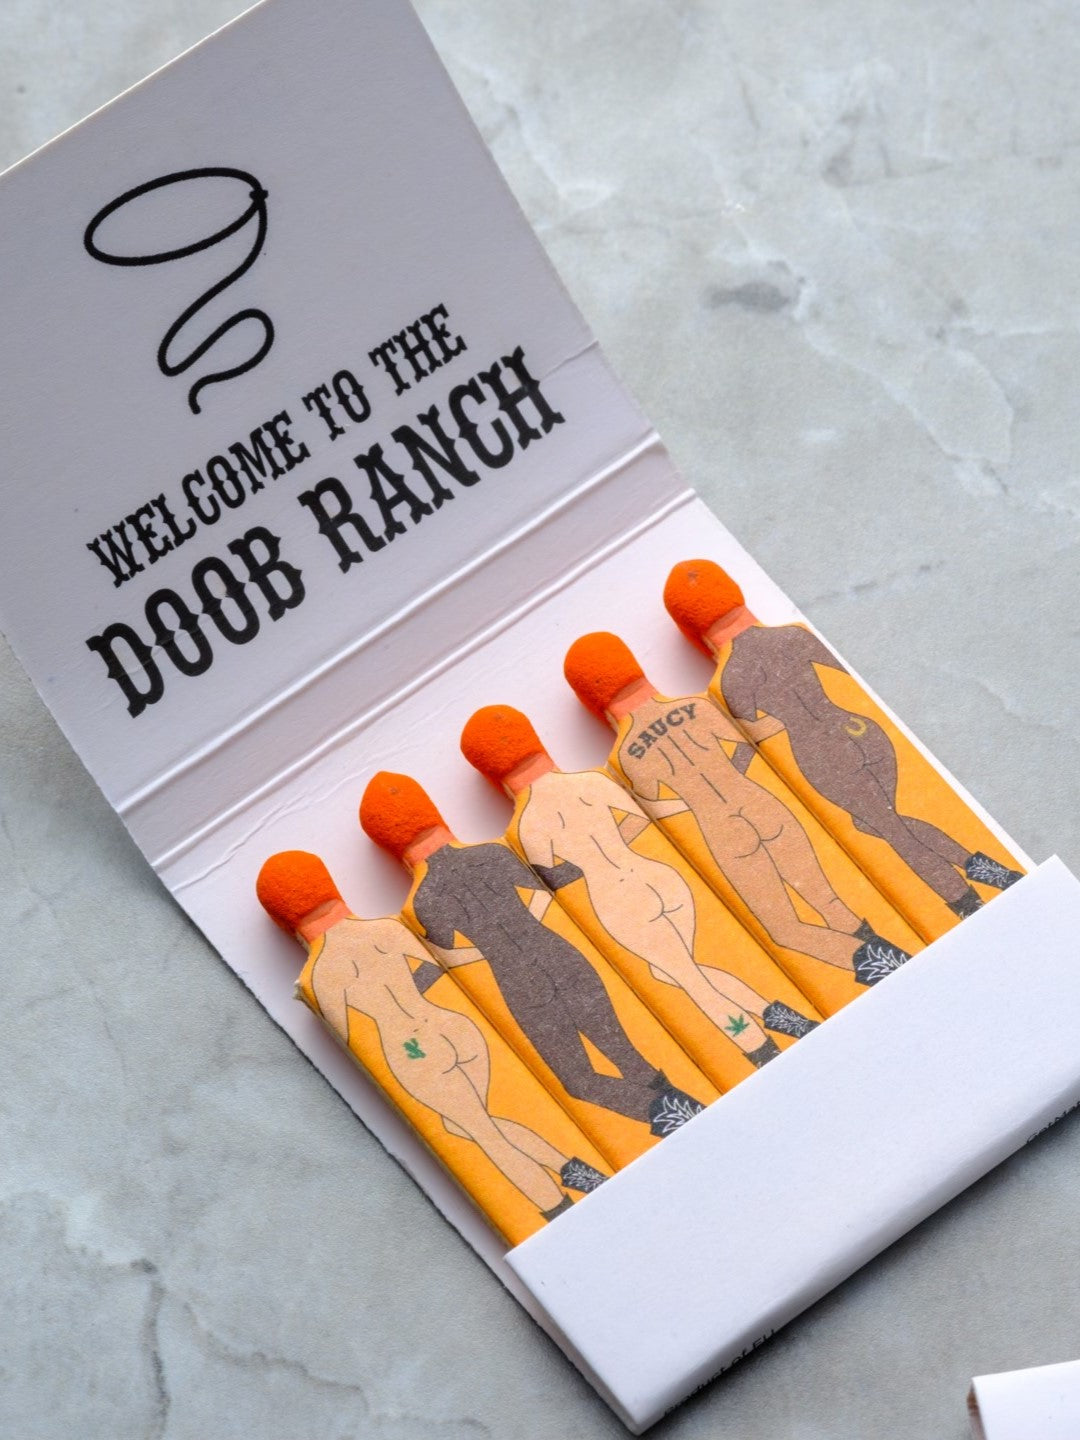 Rogue Paq x Dose of Saucy 'Welcome To The Doob Ranch' Matches